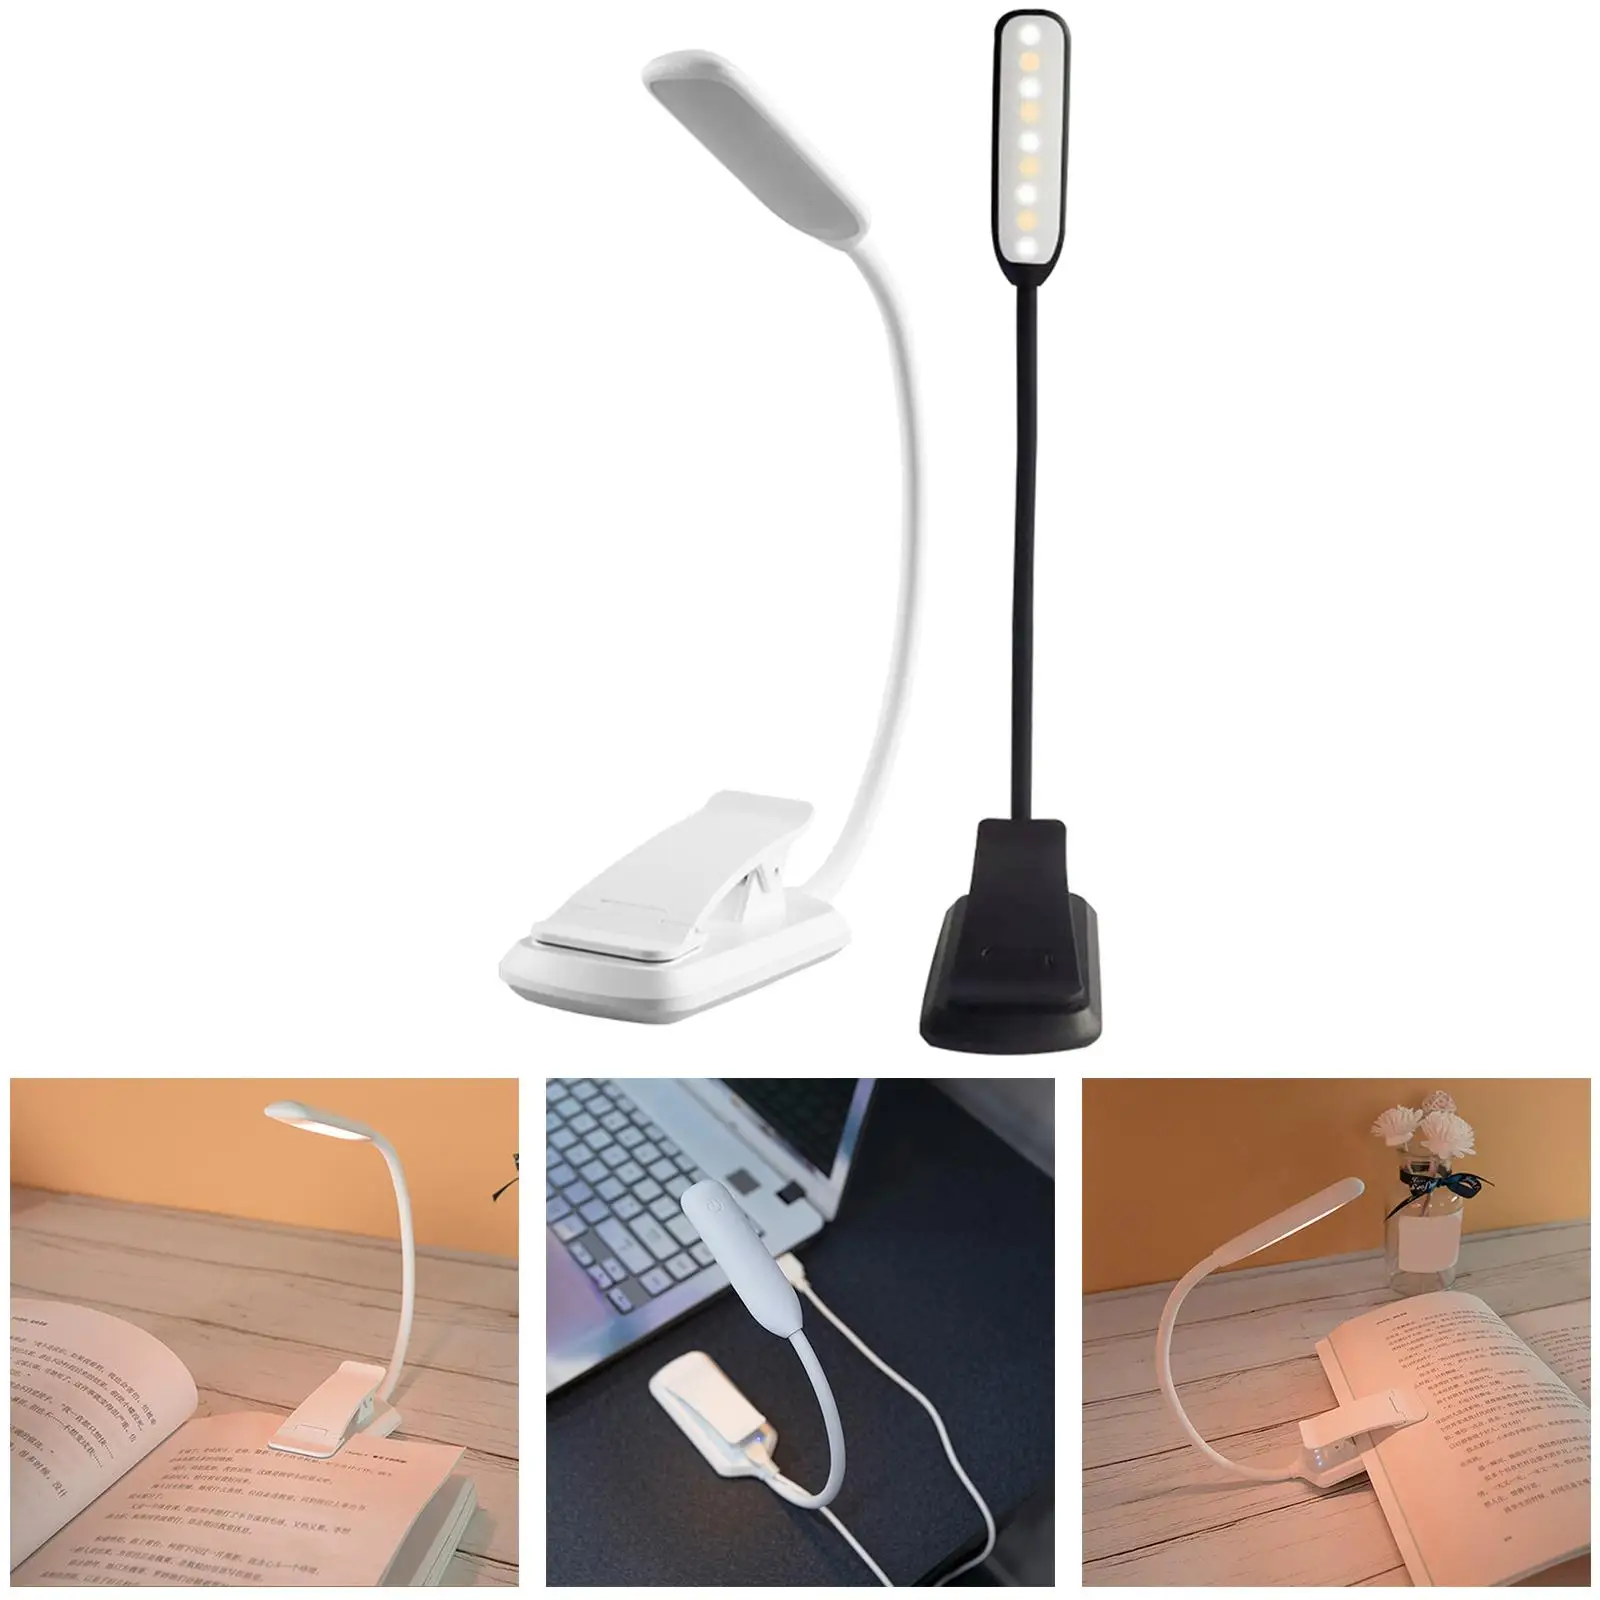 LED Clip On Reading Light Book Light Protective Night Desk Lamp for Studying Bed